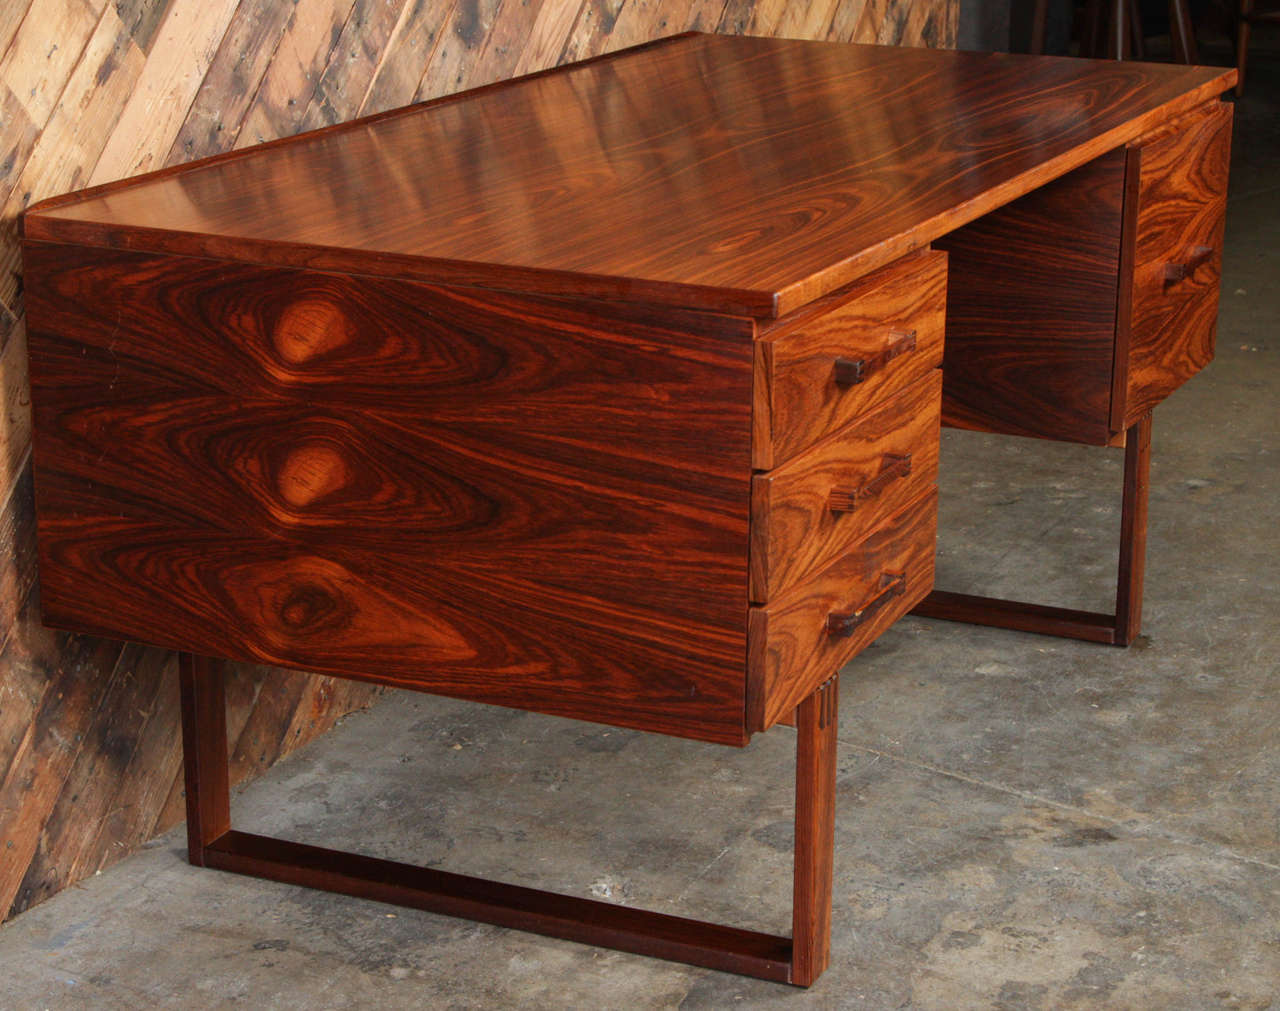 Rare desk by Torben Valeur and Henning Jensen for Schou Andersen. In rosewood with magnificent graining and the exposed, finger joint construction. Original, but excellent condition. Details include, a subtle raised lip along the back edge, exposed